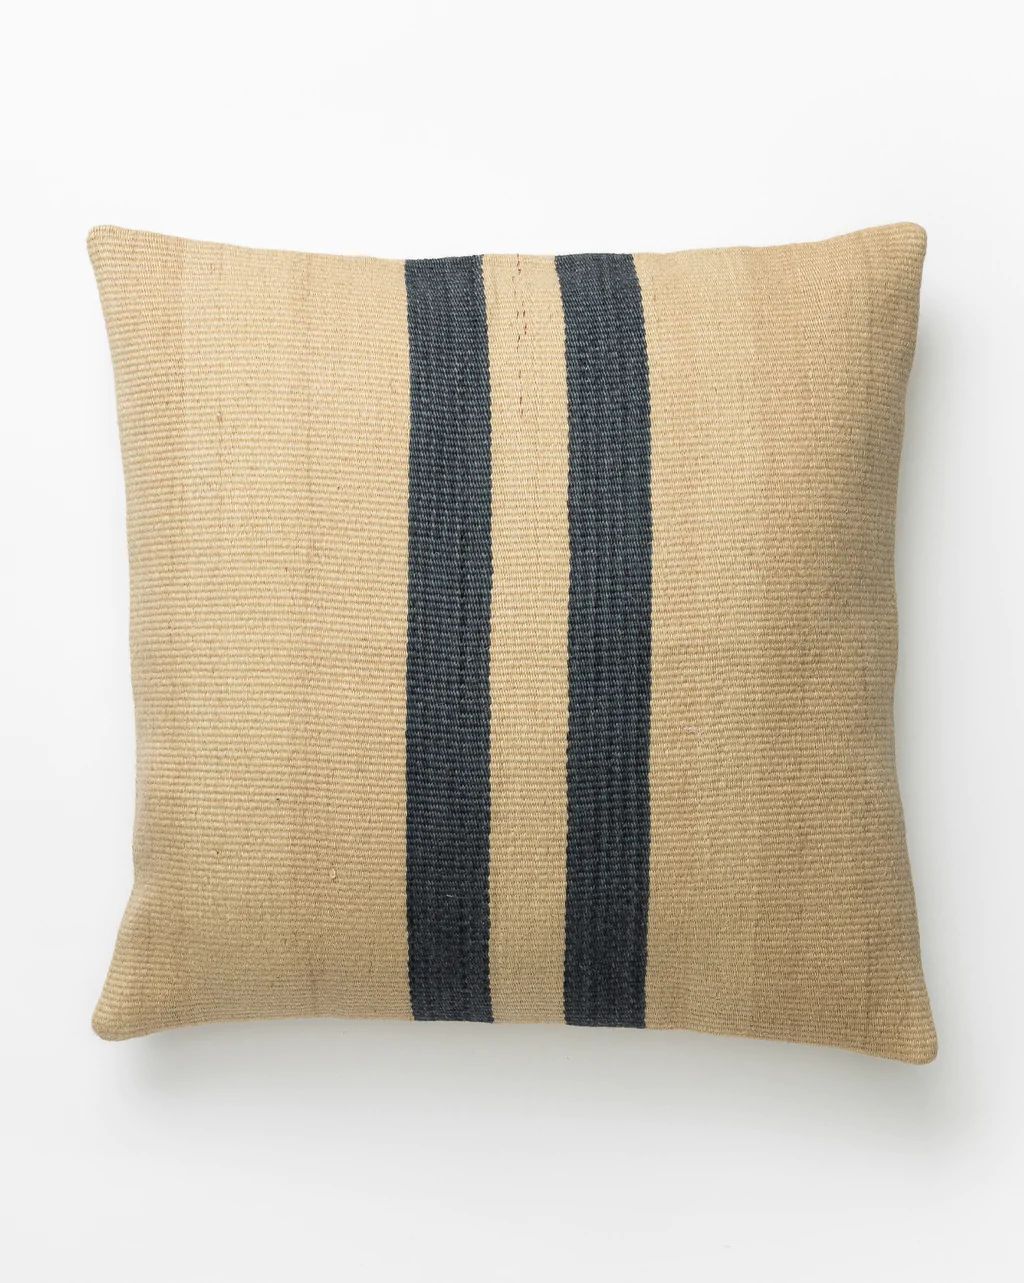 Reid Striped Pillow Cover | McGee & Co.